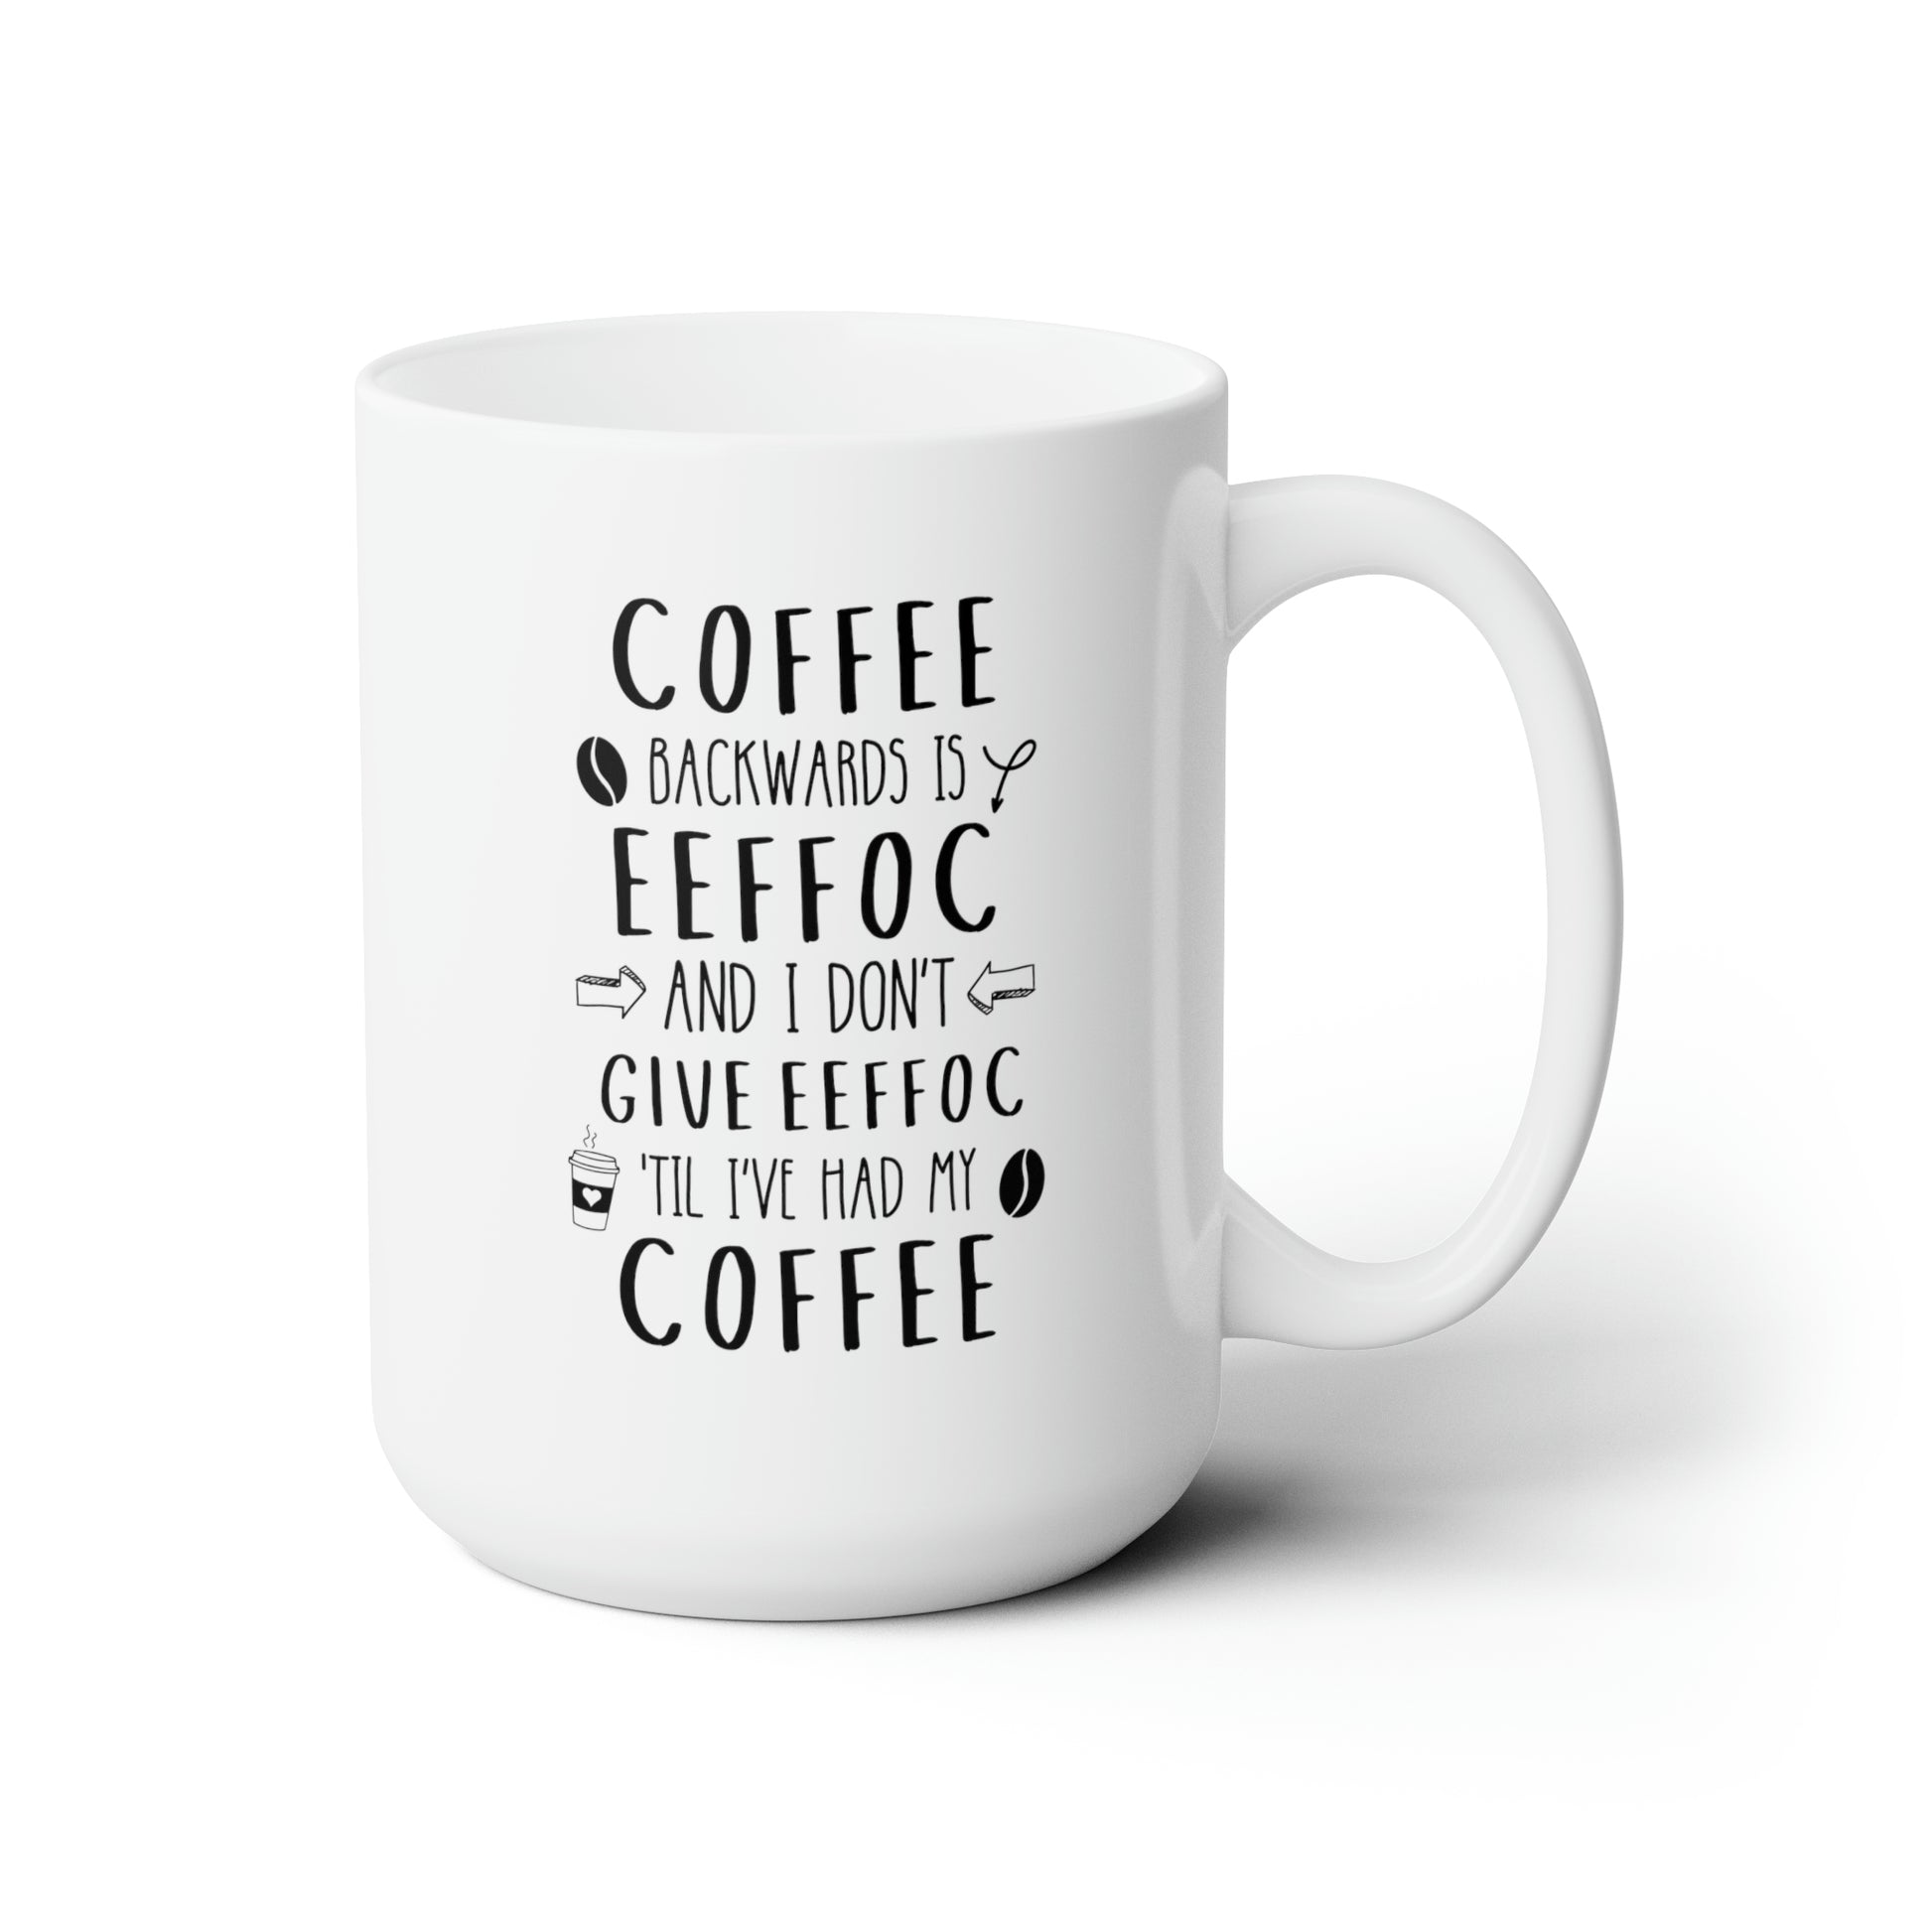 Coffee Backwards Is Eeffoc And I Dont Give Eeffoc Til Ive Had My Coffee 15oz white funny large coffee mug morning adult humour office waveywares wavey wares wavywares wavy wares